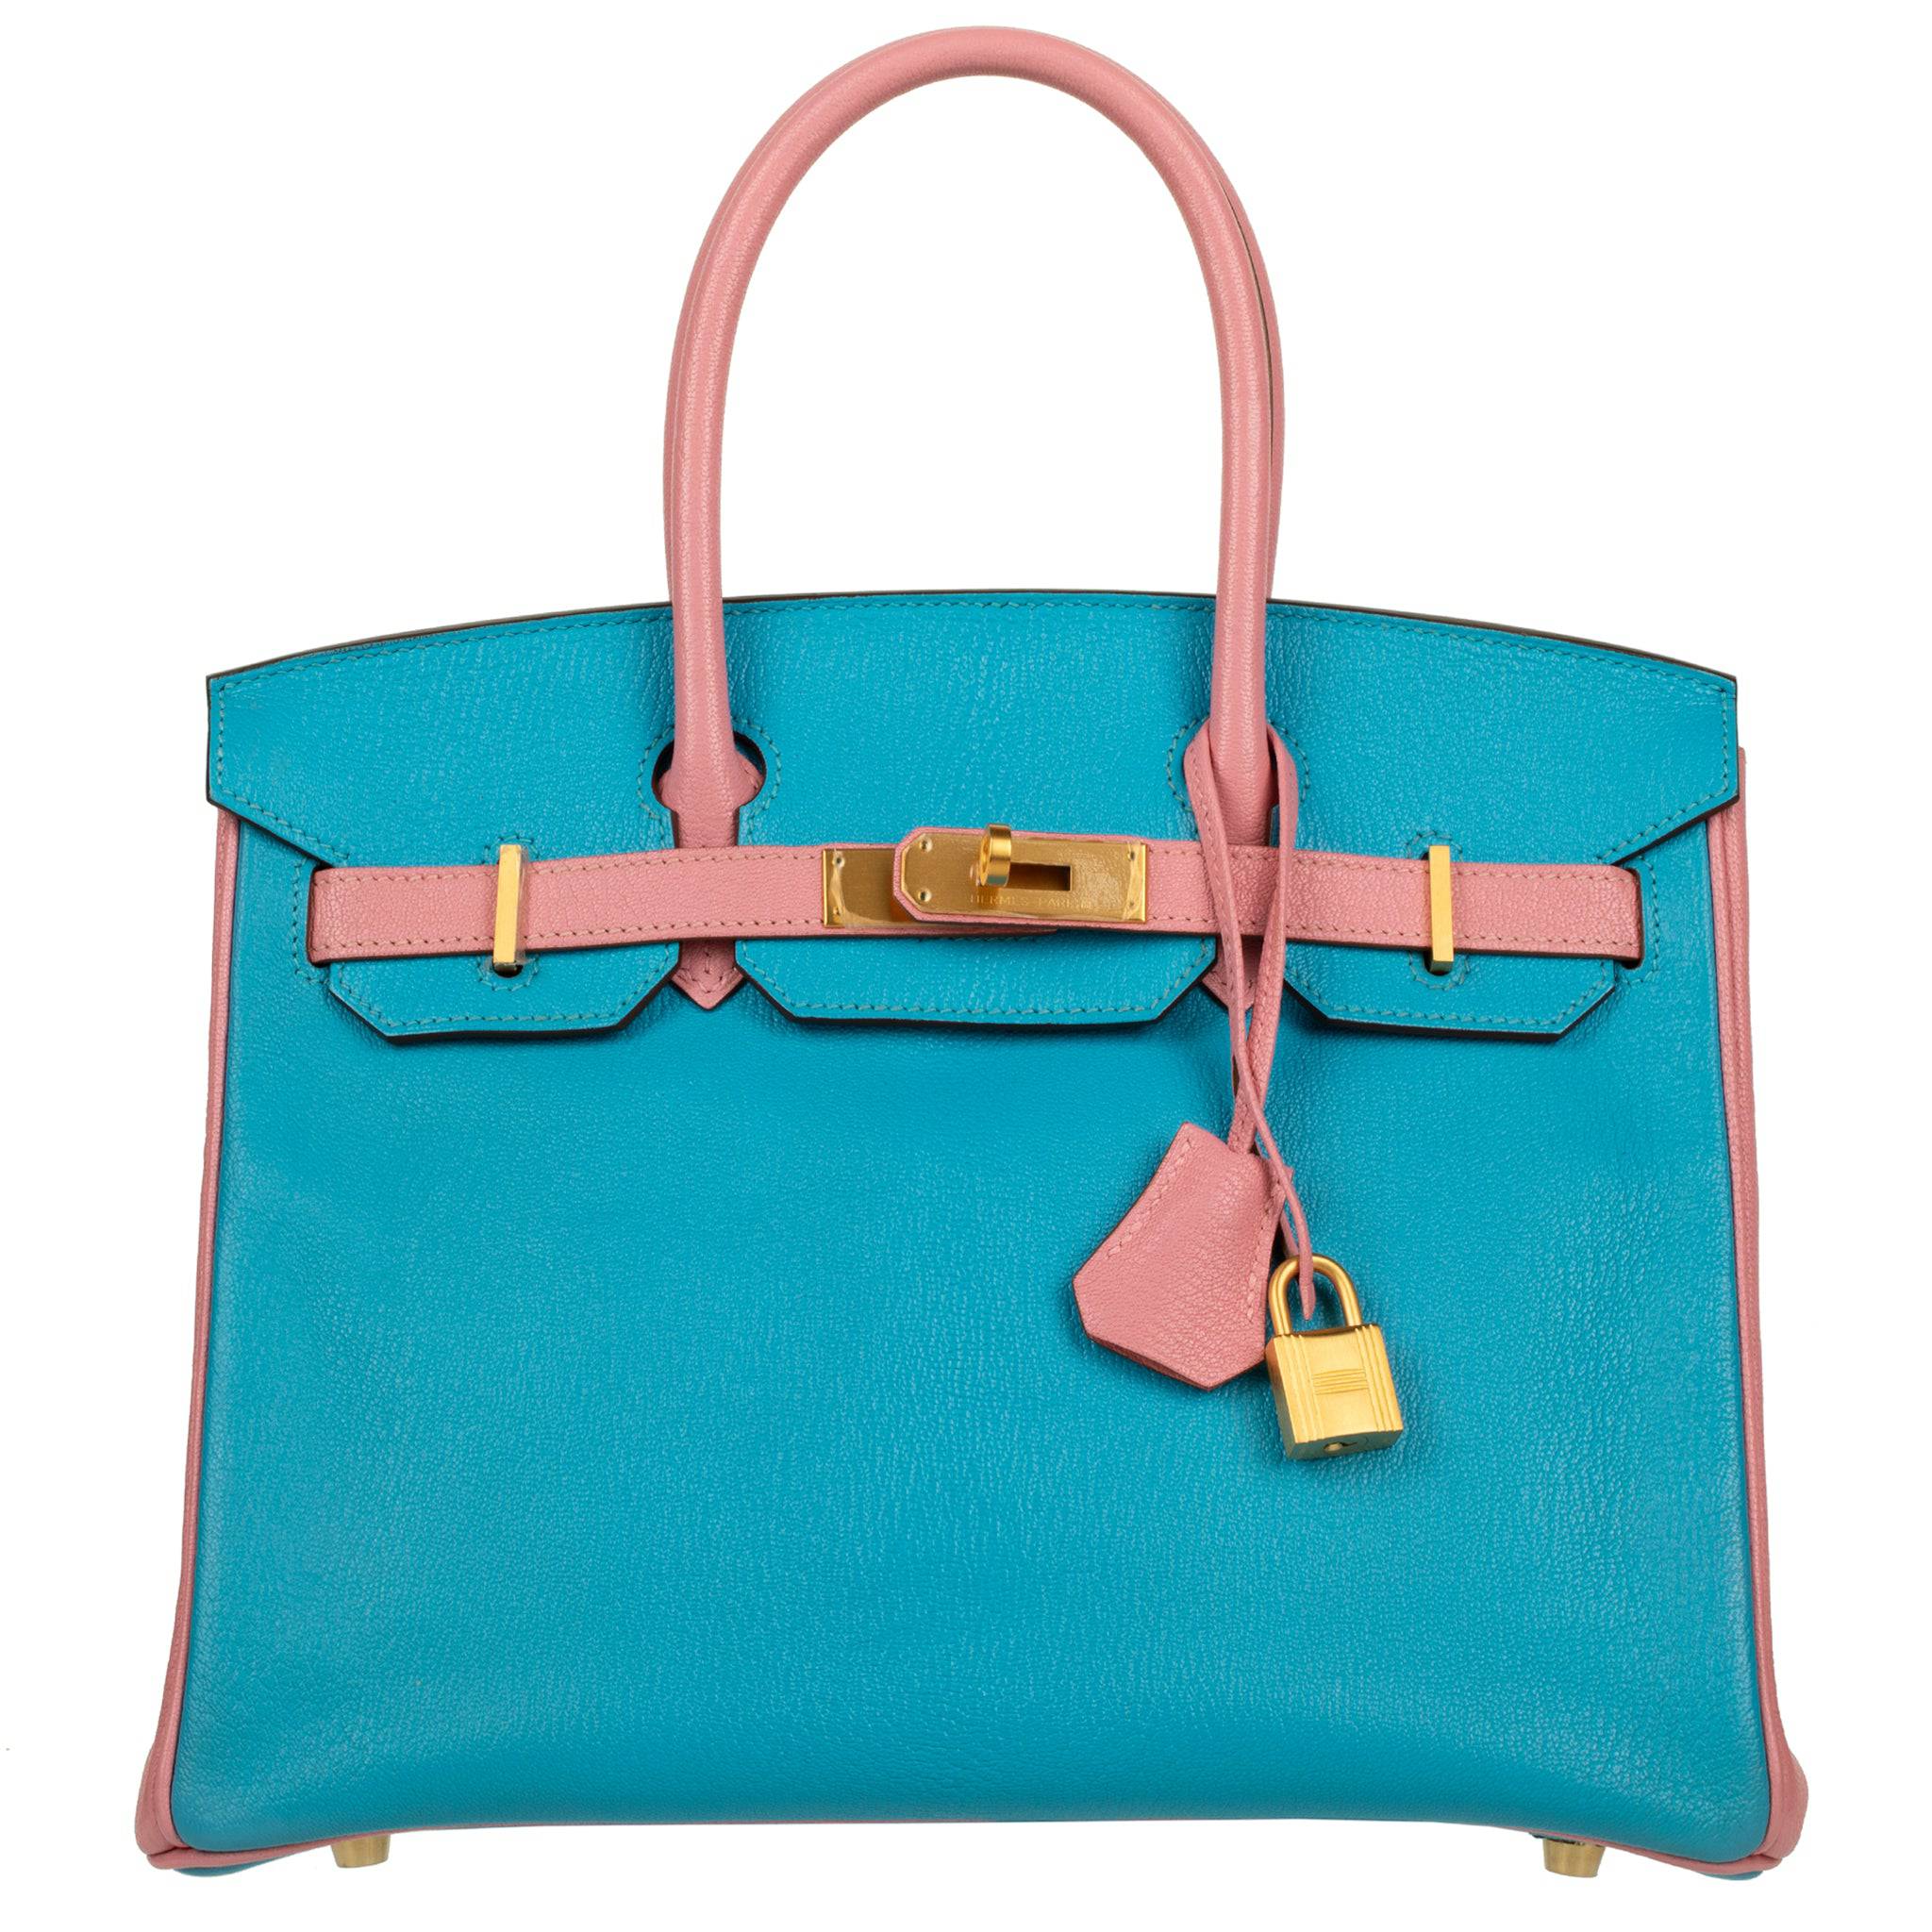 HERMES BIRKIN 30CM SPECIAL ORDER BLUE AZTEC & ROSE CONFETTI CHEVRE LEATHER BRUSHED GOLD HARDWARE - On Repeat